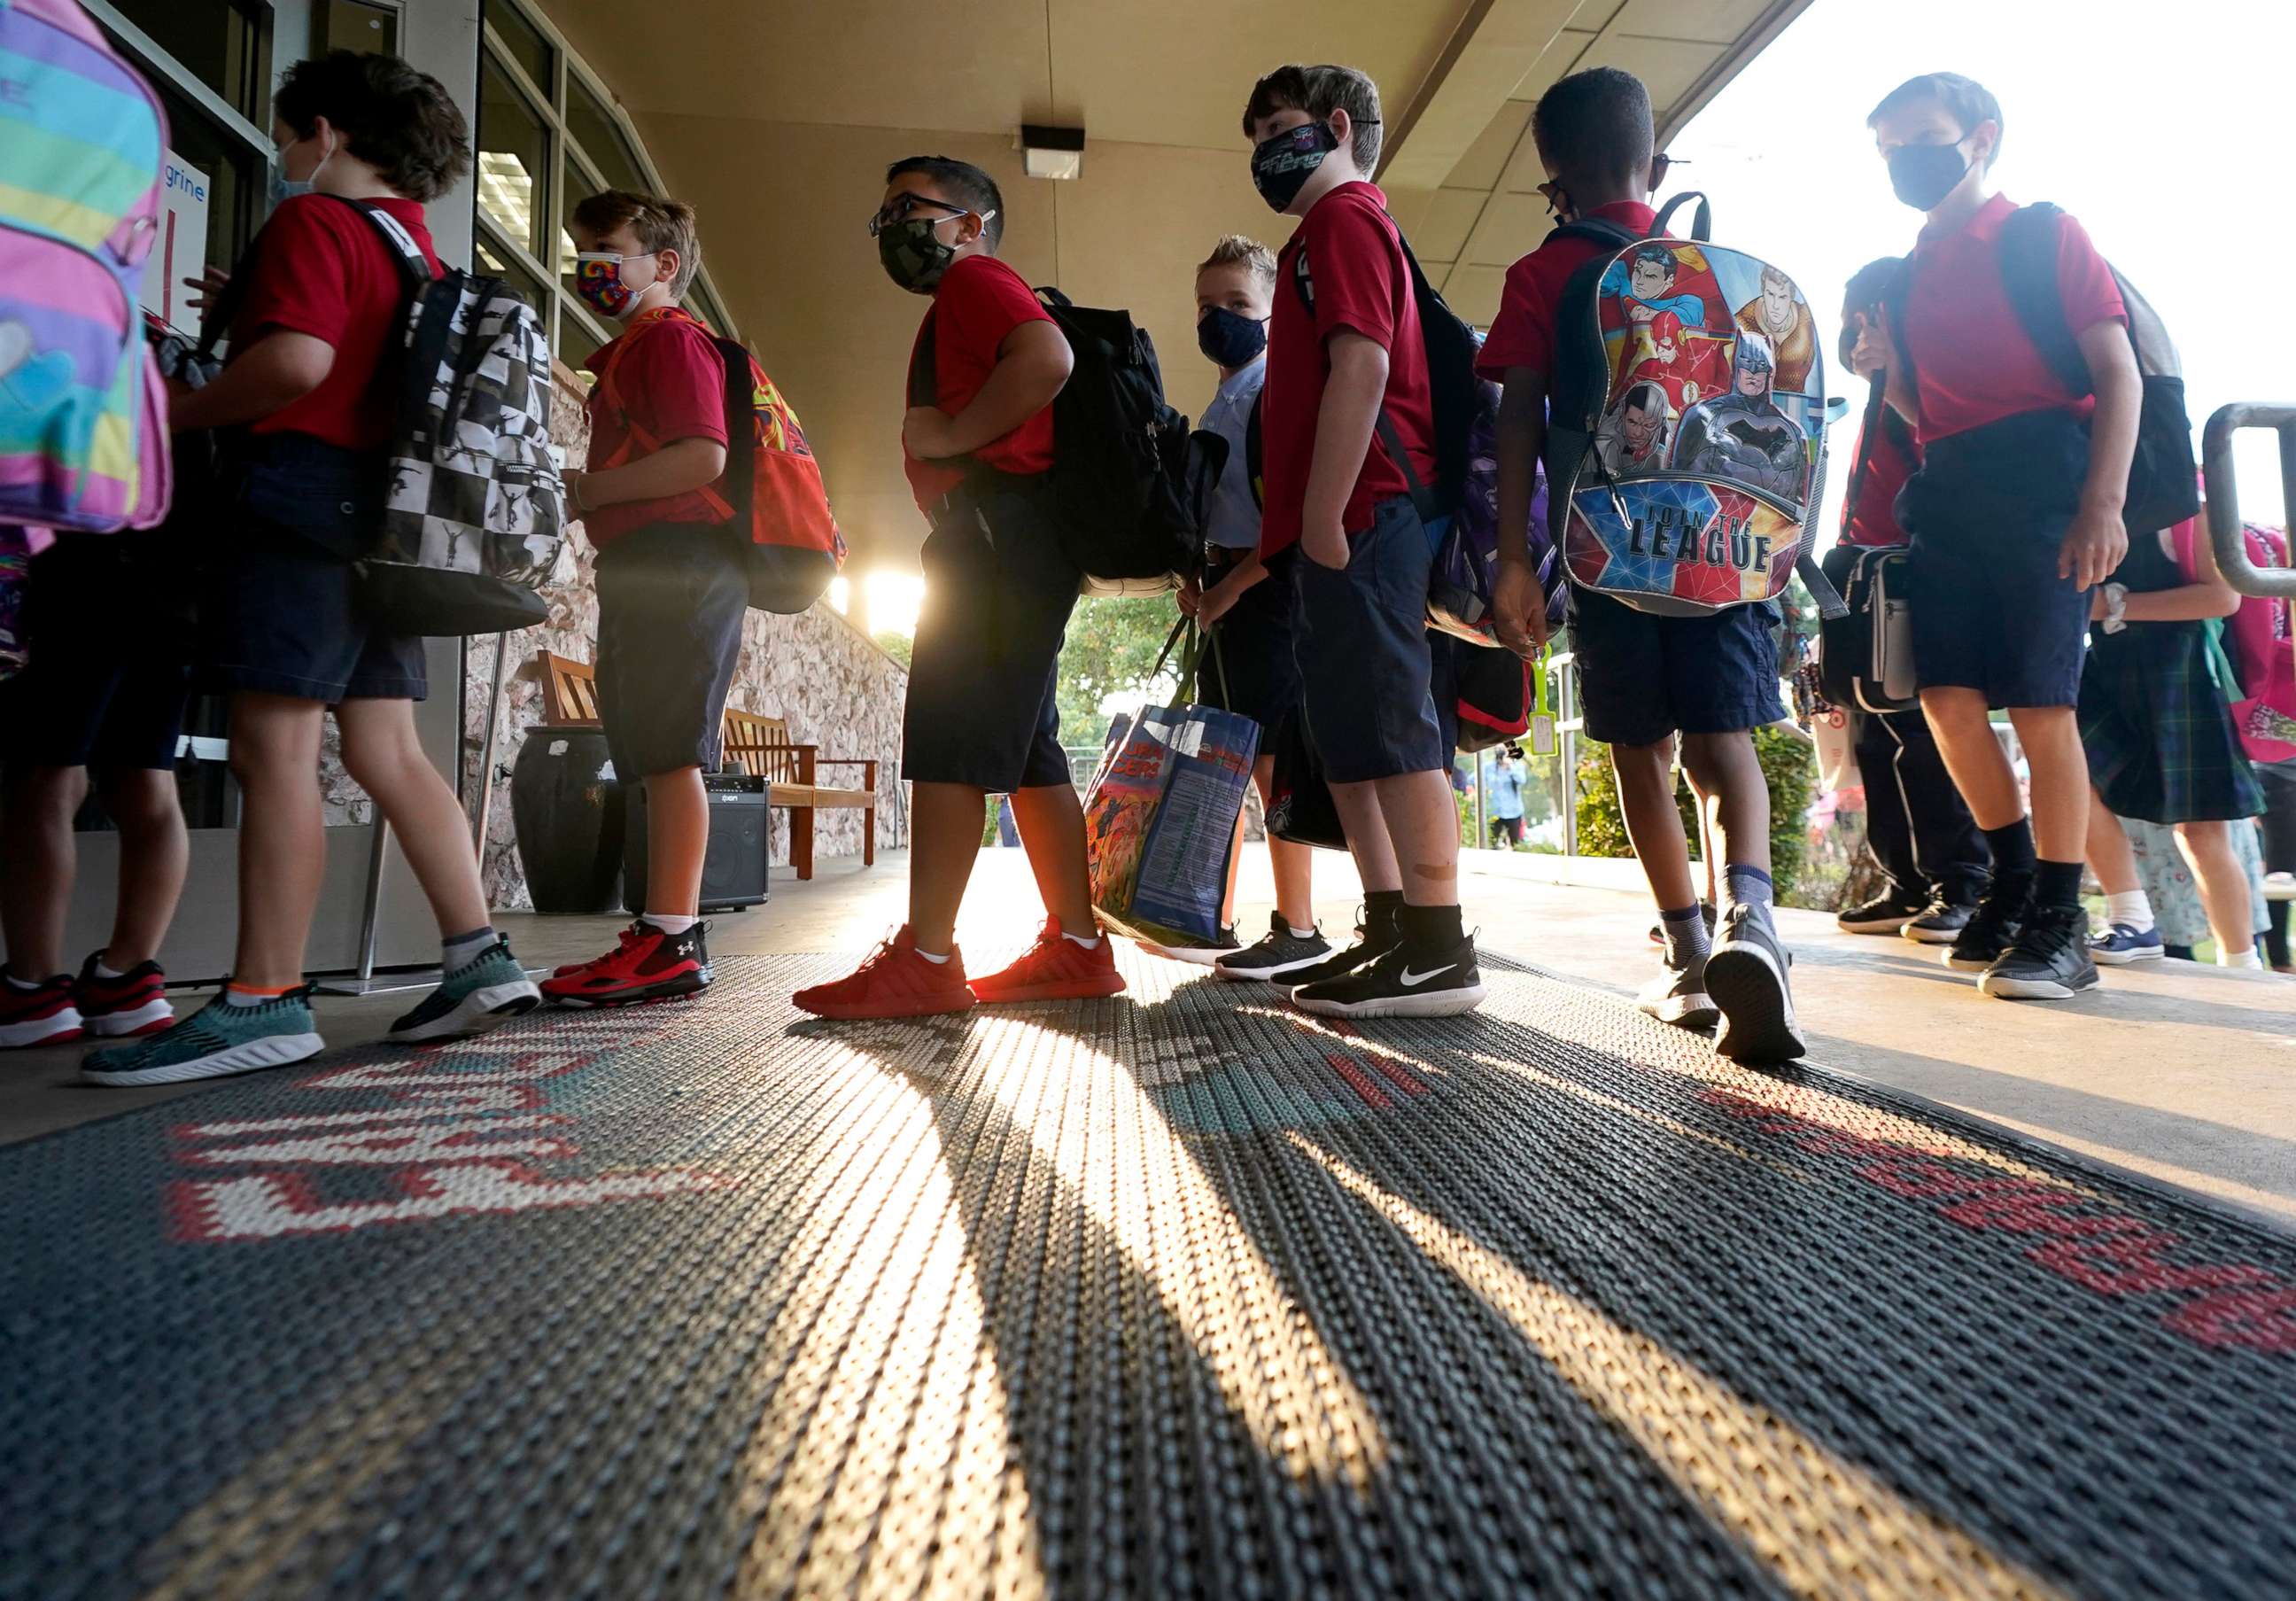 PHOTO: Wearing masks to prevent the spread of COVID-19, elementary school student line up to enter school for the first day of classes in Richardson, Texas, Aug. 17, 2021.